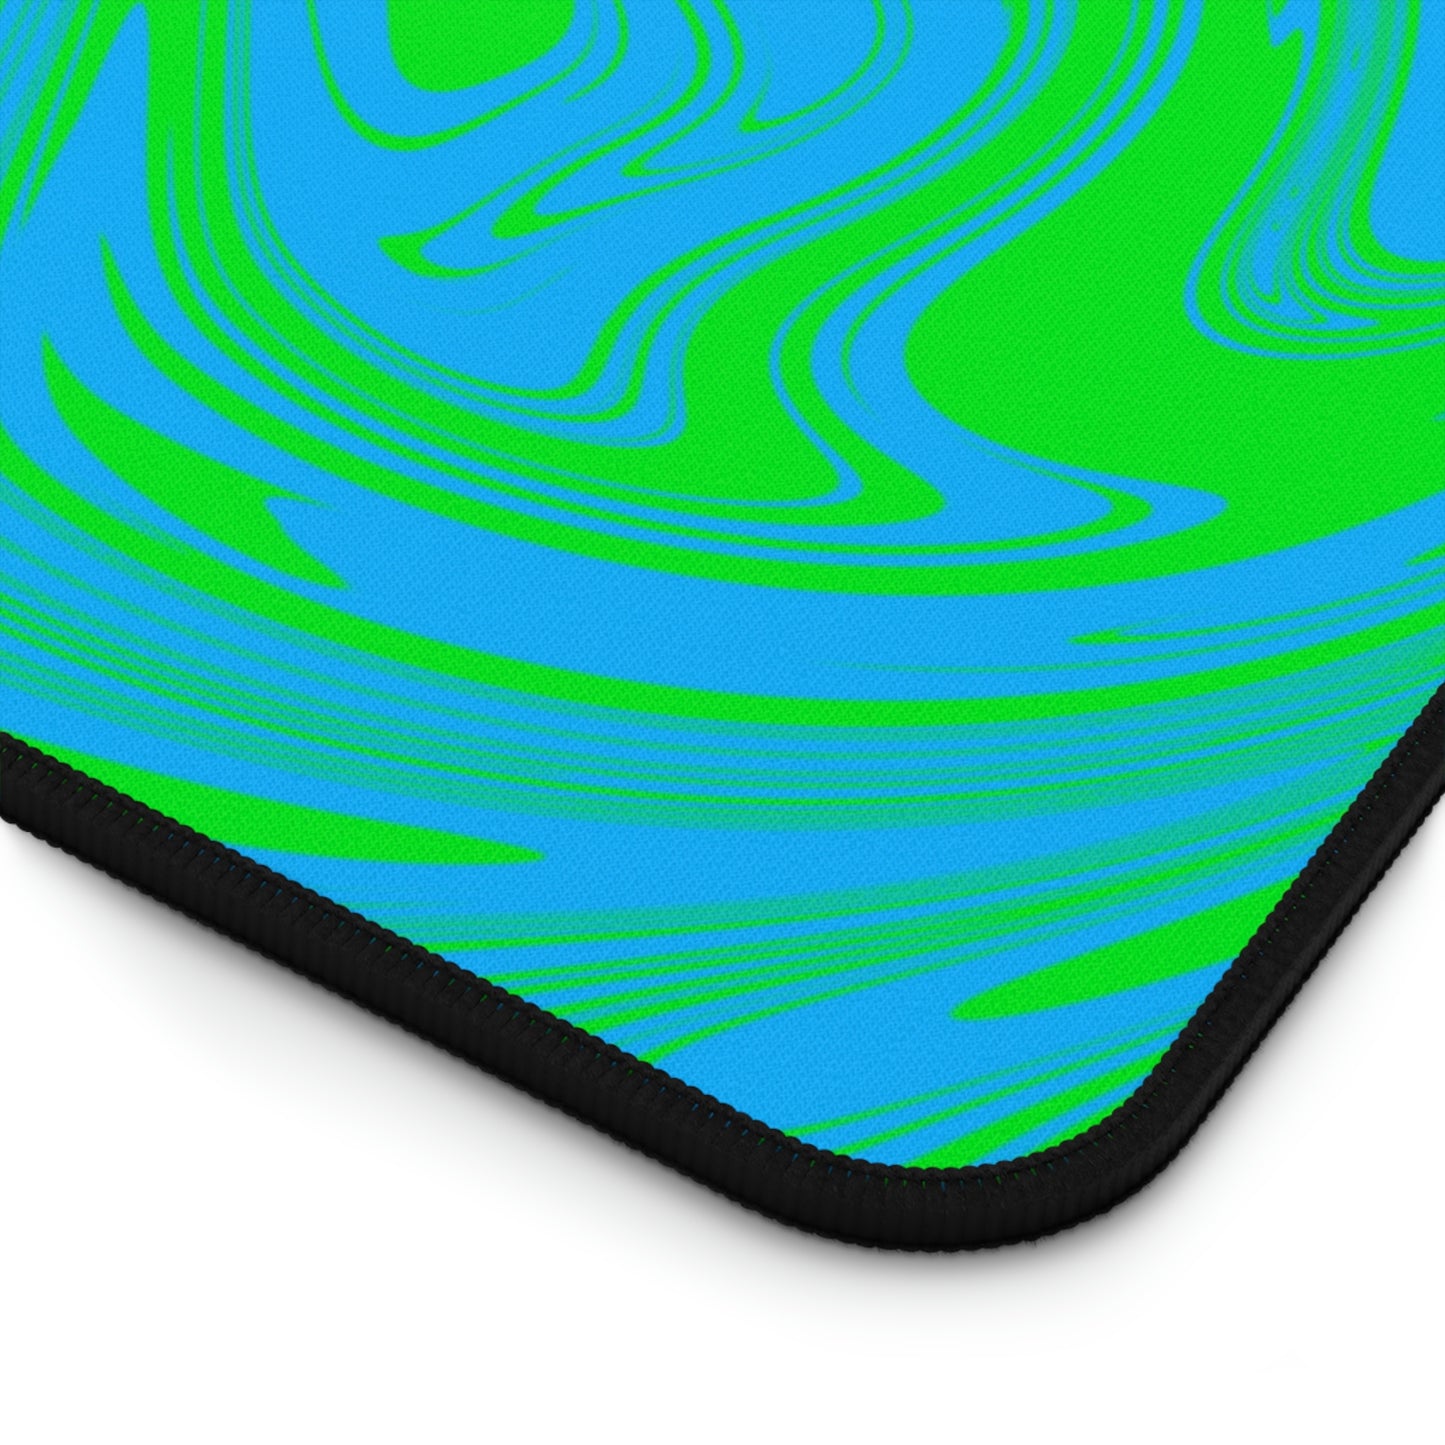 The corner of a 31" x 15.5" desk mat with blue and green swirls.